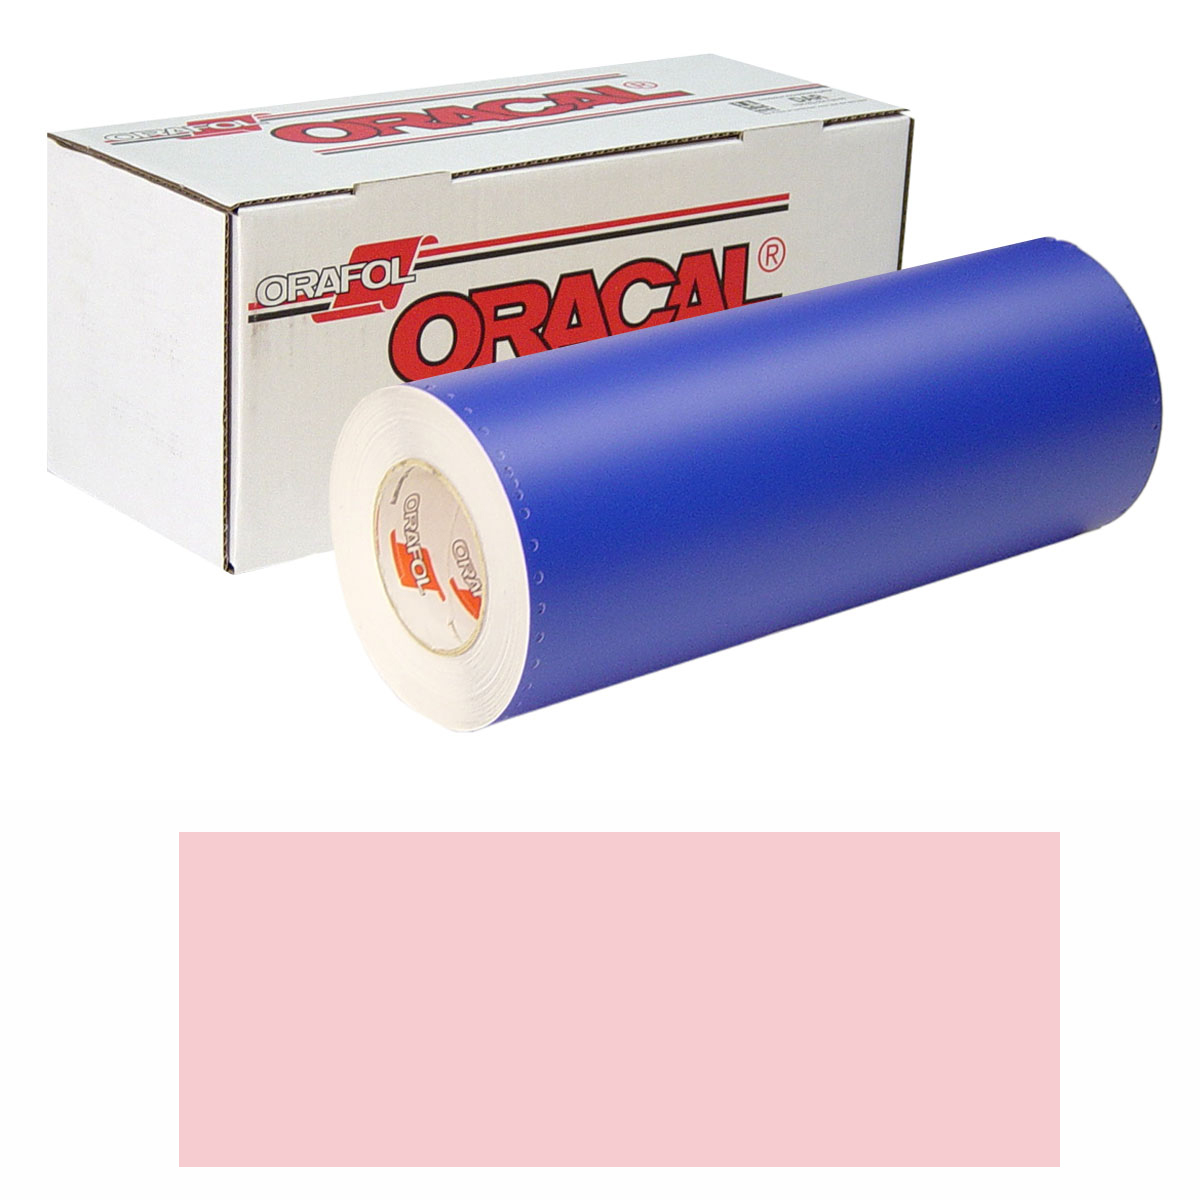 ORACAL 8300 30in X 10yd 085 Pale-Pink